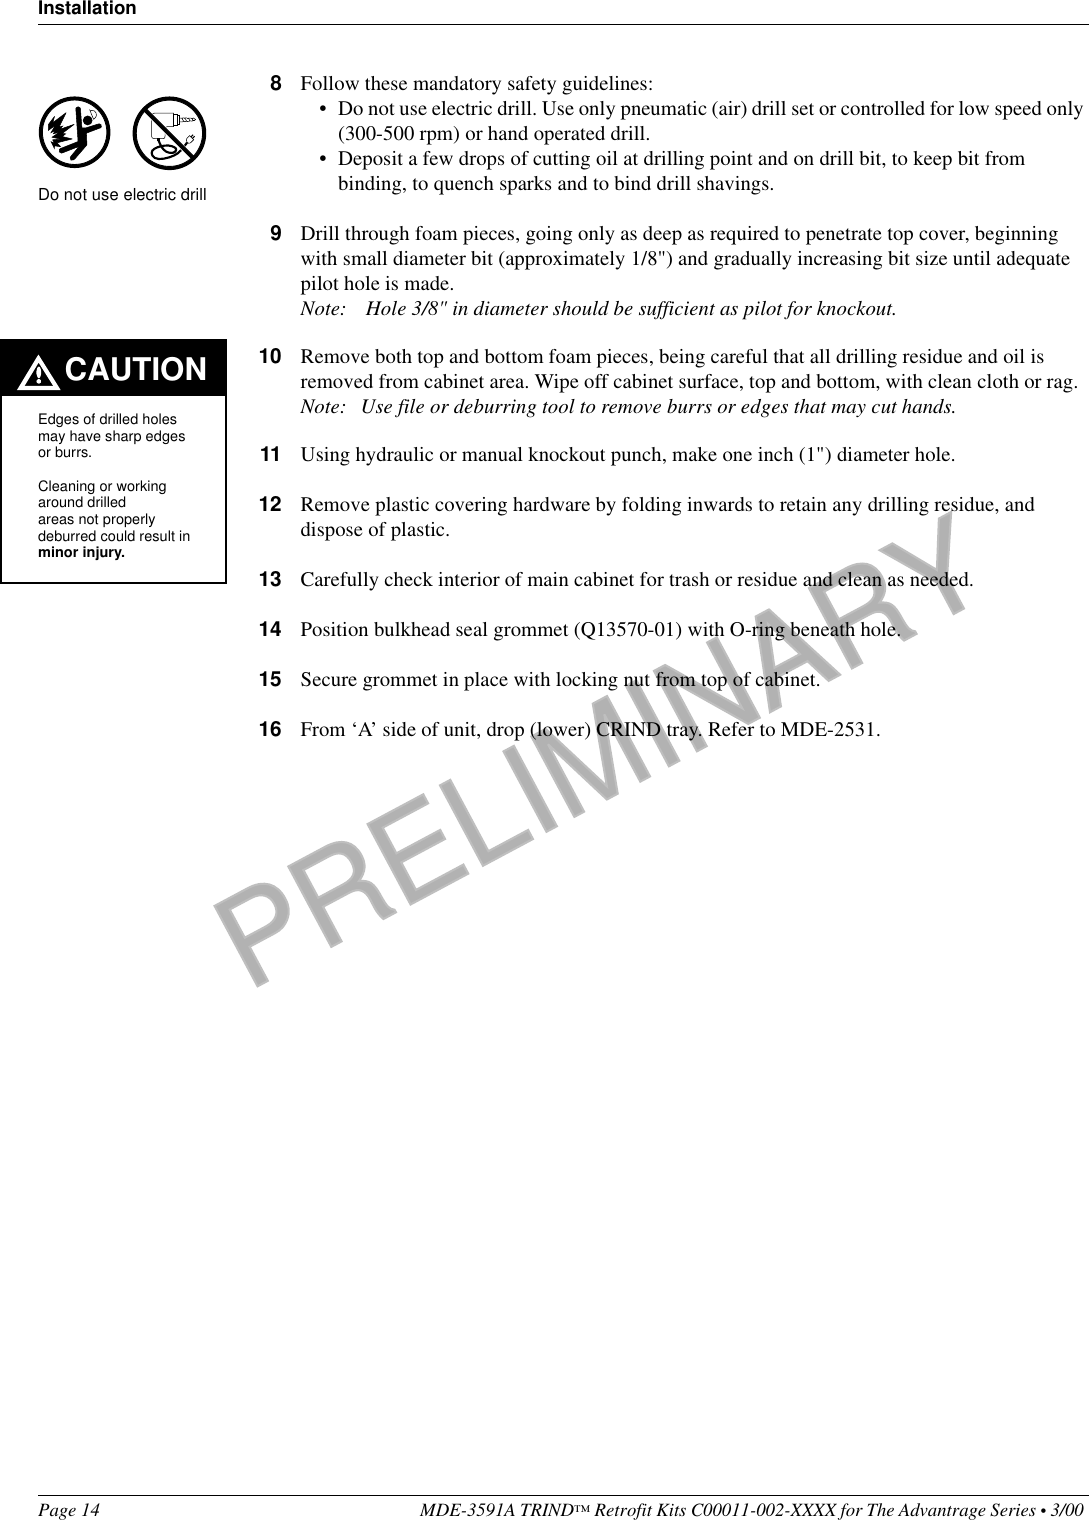 PRELIMINARYInstallationPage 14 MDE-3591A TRIND™ Retrofit Kits C00011-002-XXXX for The Advantrage Series • 3/00 8Follow these mandatory safety guidelines:• Do not use electric drill. Use only pneumatic (air) drill set or controlled for low speed only (300-500 rpm) or hand operated drill.• Deposit a few drops of cutting oil at drilling point and on drill bit, to keep bit from binding, to quench sparks and to bind drill shavings.9Drill through foam pieces, going only as deep as required to penetrate top cover, beginning with small diameter bit (approximately 1/8&quot;) and gradually increasing bit size until adequate pilot hole is made.Note:  Hole 3/8&quot; in diameter should be sufficient as pilot for knockout.10 Remove both top and bottom foam pieces, being careful that all drilling residue and oil is removed from cabinet area. Wipe off cabinet surface, top and bottom, with clean cloth or rag.Note: Use file or deburring tool to remove burrs or edges that may cut hands.11 Using hydraulic or manual knockout punch, make one inch (1&quot;) diameter hole.12 Remove plastic covering hardware by folding inwards to retain any drilling residue, and dispose of plastic.13 Carefully check interior of main cabinet for trash or residue and clean as needed.14 Position bulkhead seal grommet (Q13570-01) with O-ring beneath hole.15 Secure grommet in place with locking nut from top of cabinet.16 From ‘A’ side of unit, drop (lower) CRIND tray. Refer to MDE-2531.CAUTIONEdges of drilled holes may have sharp edges or burrs.Cleaning or working around drilled areas not properly deburred could result in minor injury.Do not use electric drill